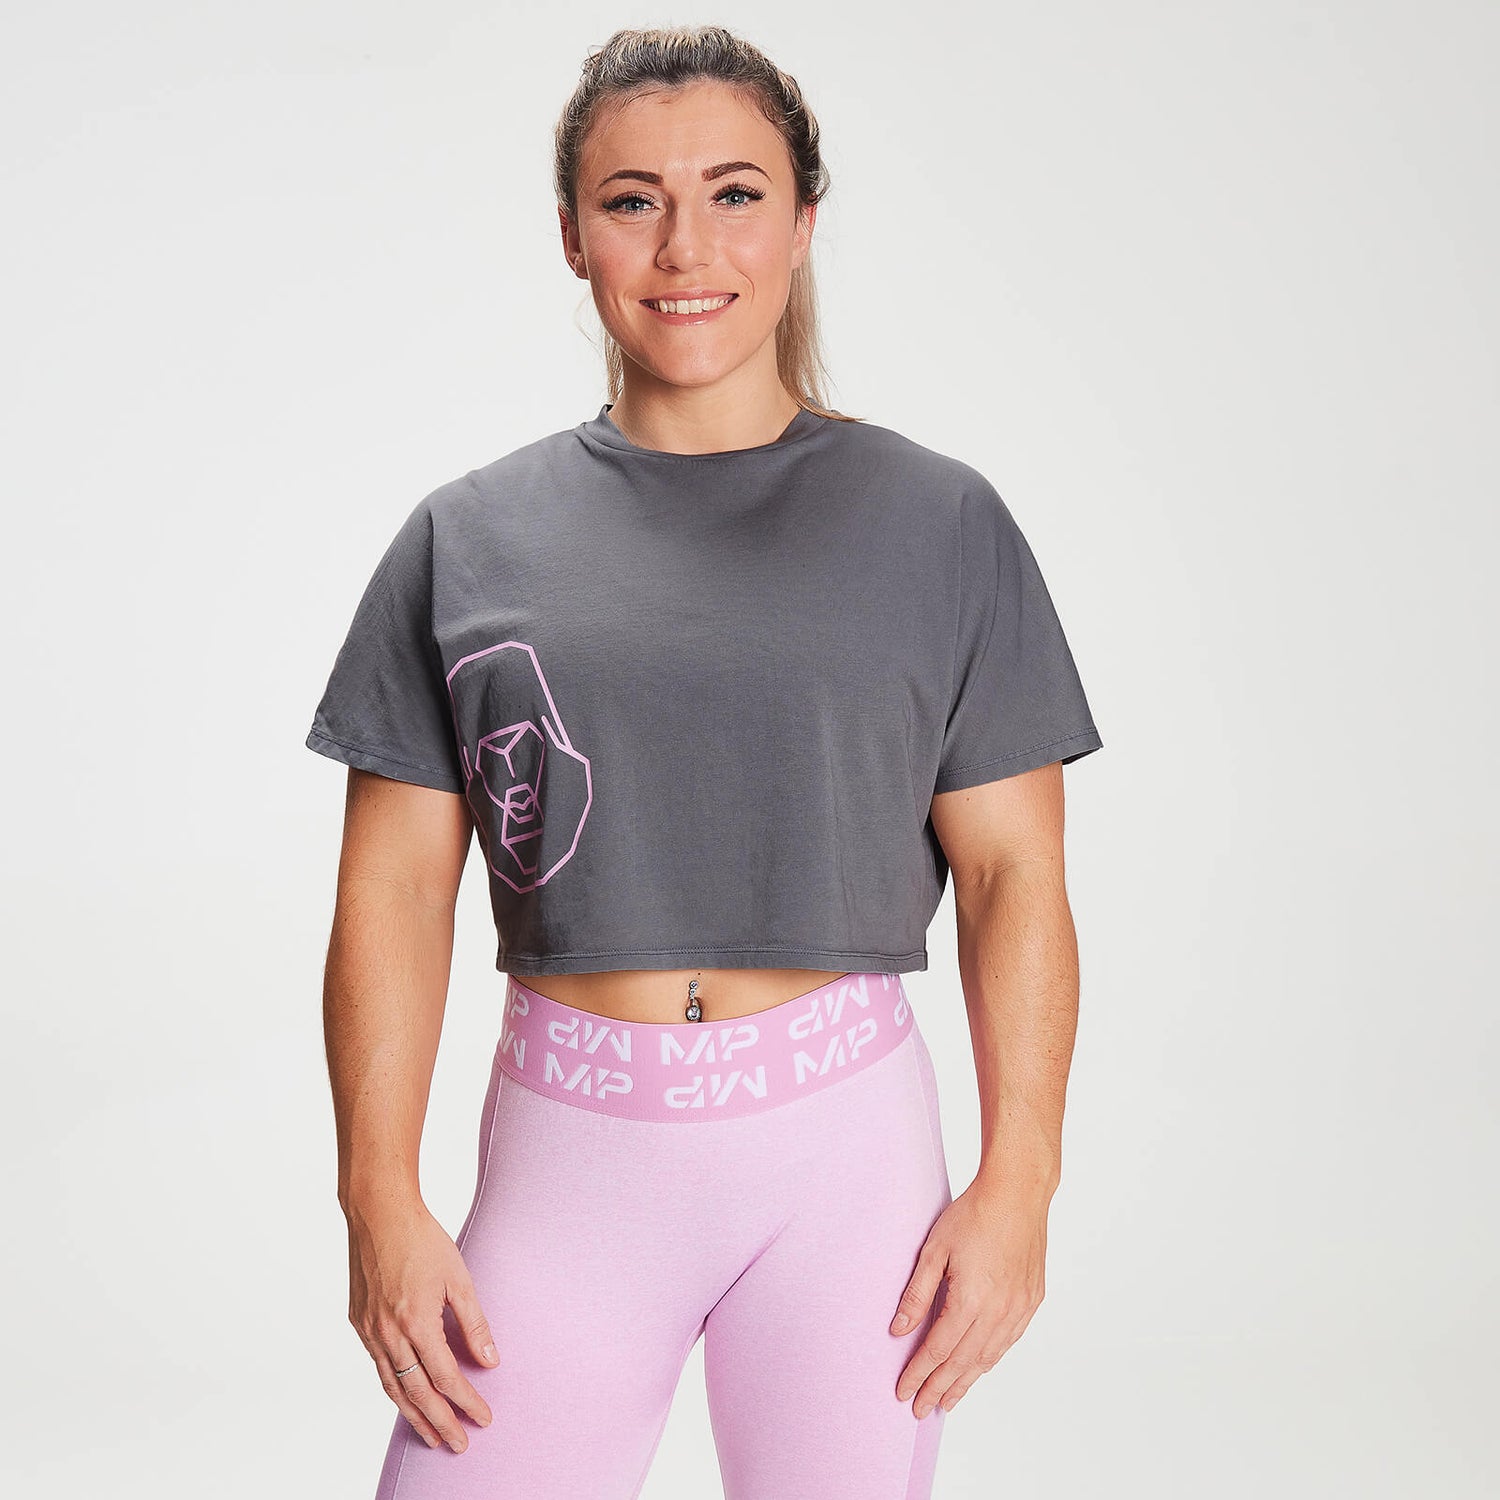 MP X Zack George Women's Washed Crop T-Shirt - Carbon